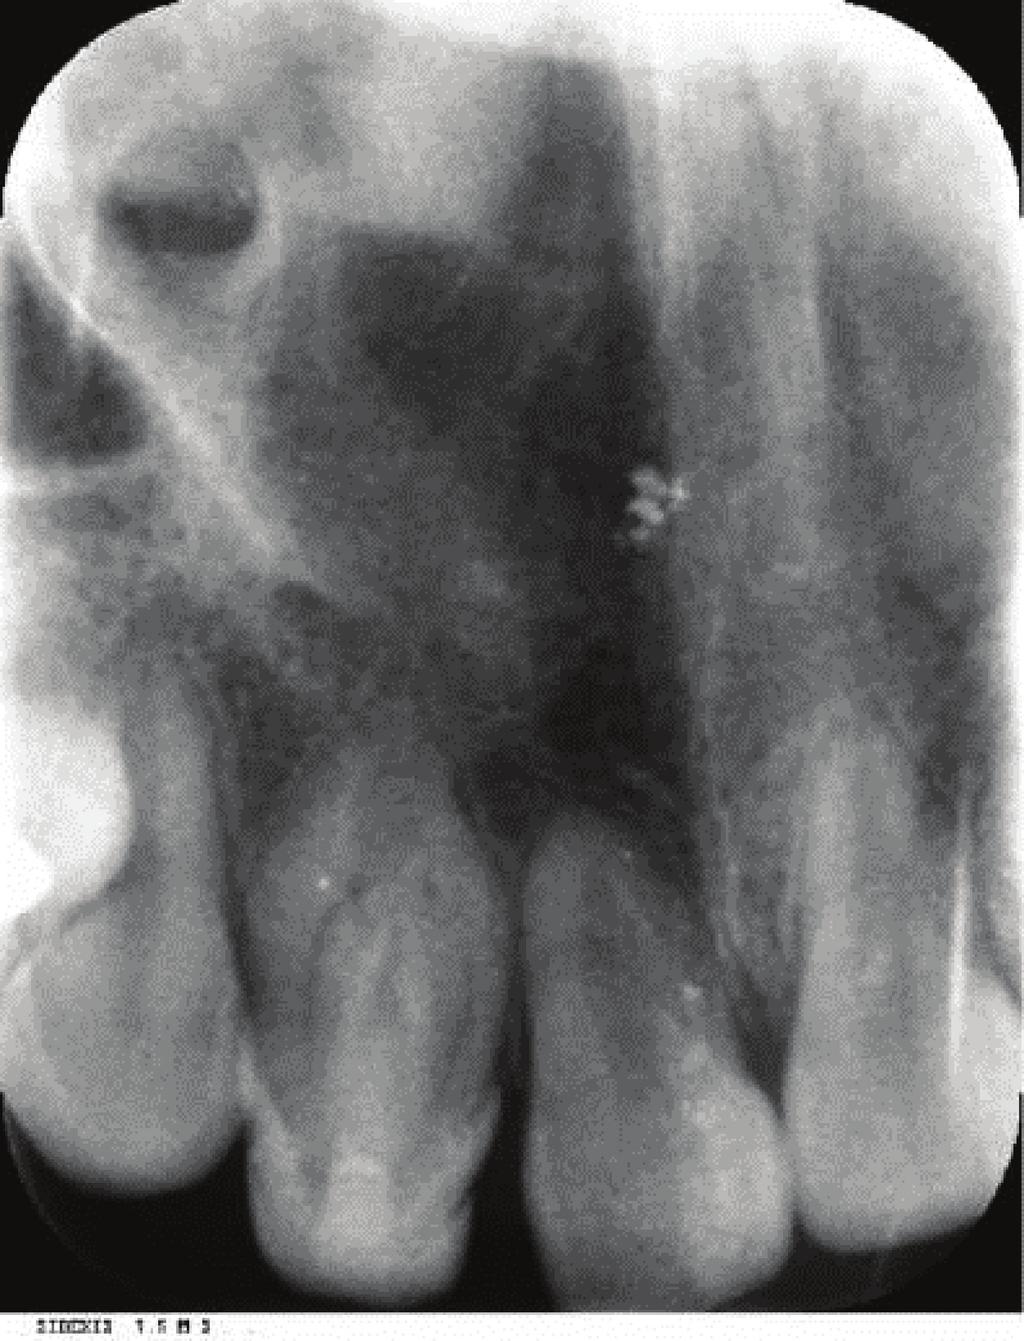 One month after the antibiotic treatment, the tooth was asymptomatic. In the next phase of the treatment, the regeneration protocol was performed.